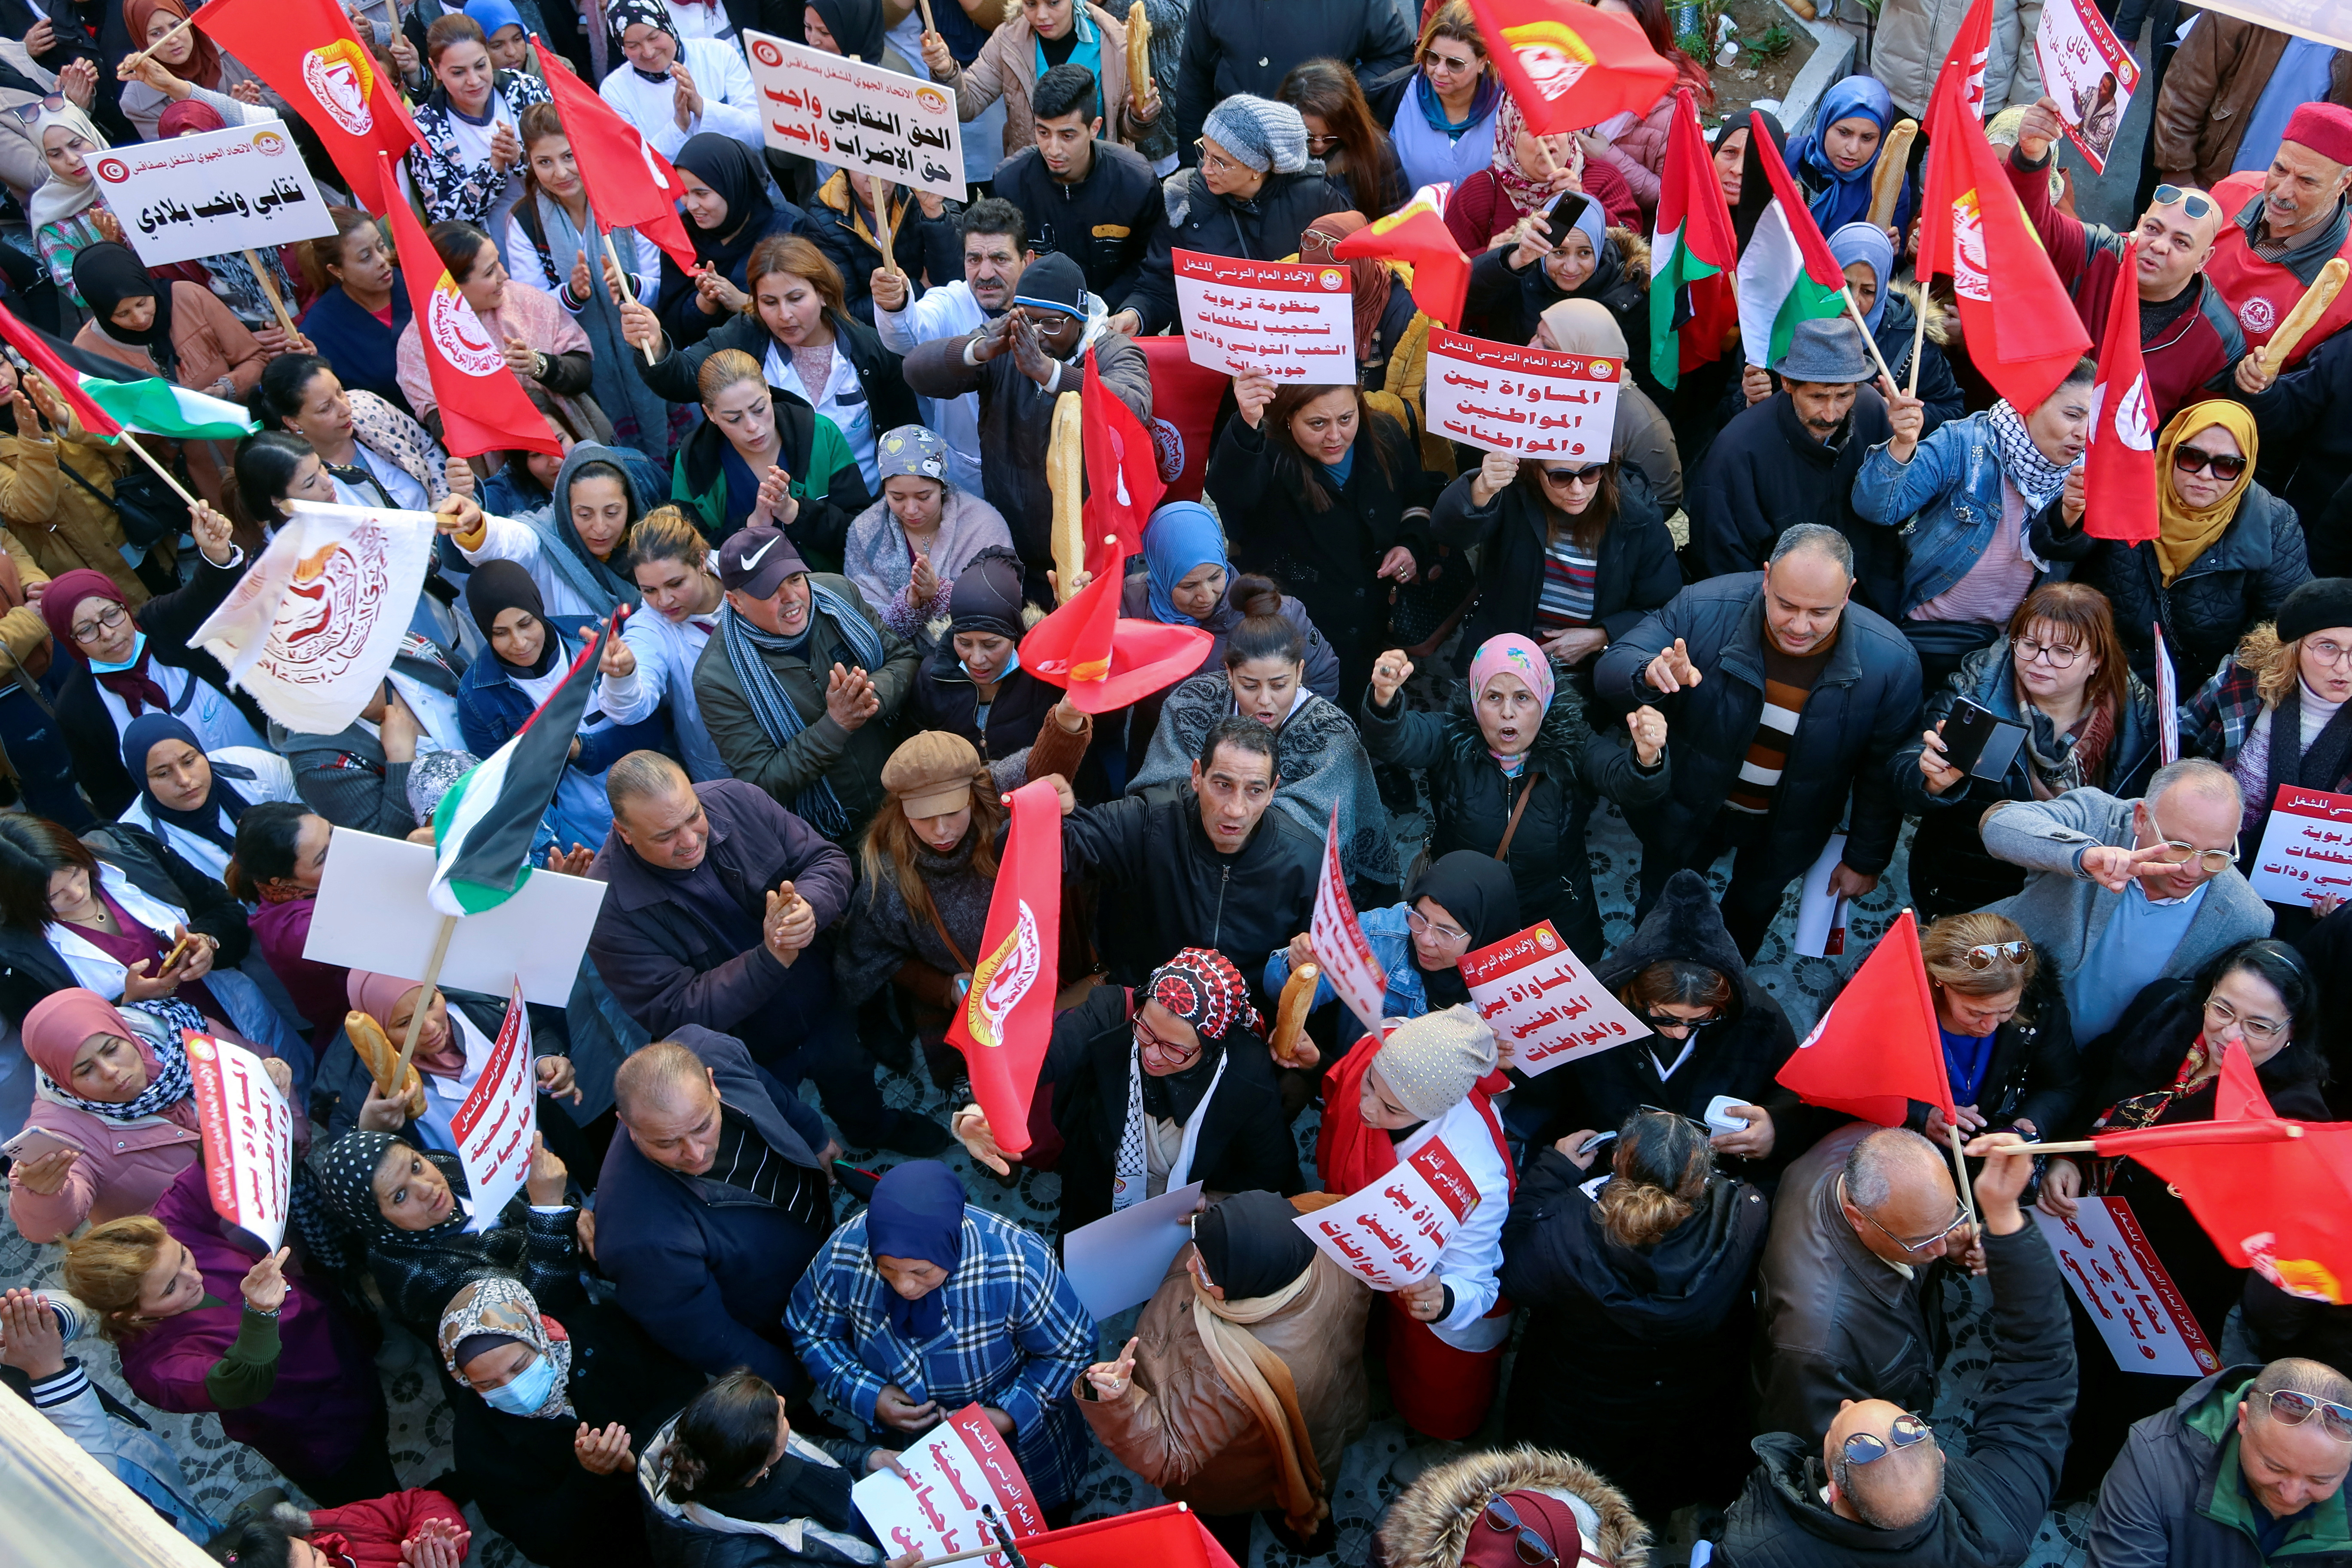 Supporters of the Tunisian General Labour Union (UGTT), carry flags and banners during a protest against what they say authority's attacks on freedoms and union rights, in Sfax